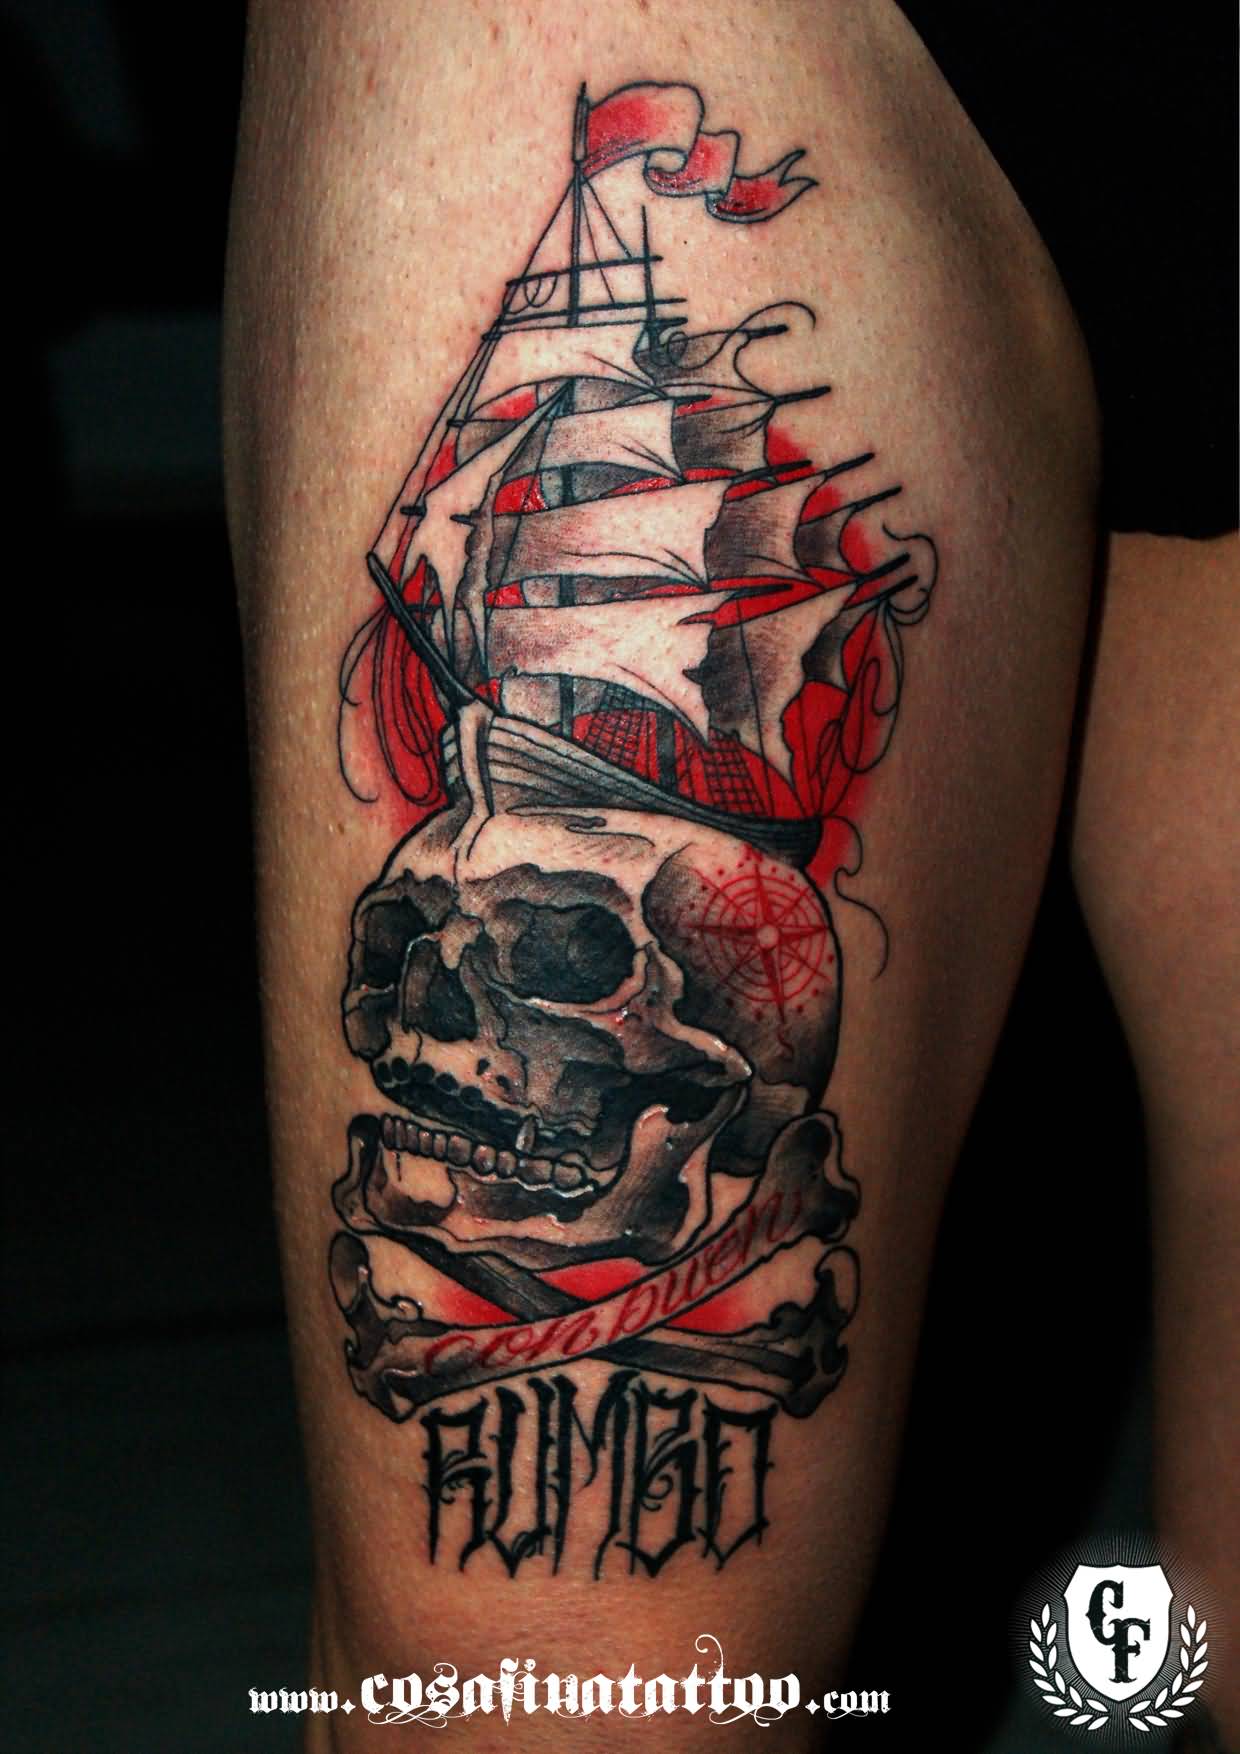 Black And Red Neo Pirate Ship On Skull Tattoo Design For Thigh